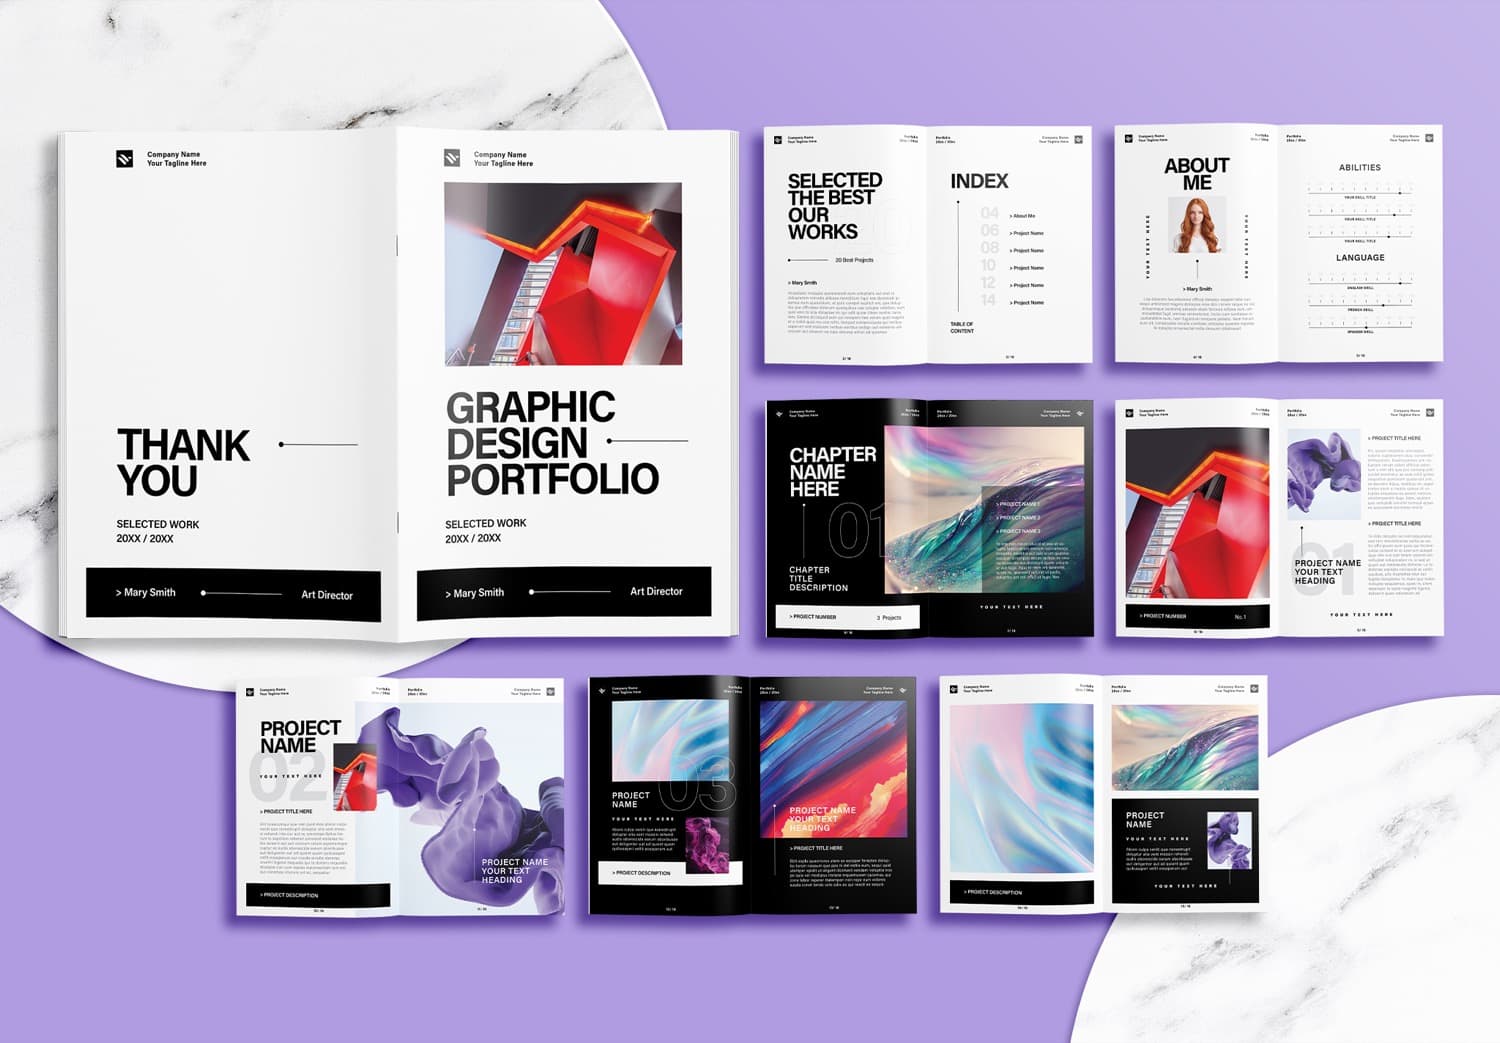 Free InDesign Modern Graphic Design Portfolio Layout Template with Black and Light Gray Accents